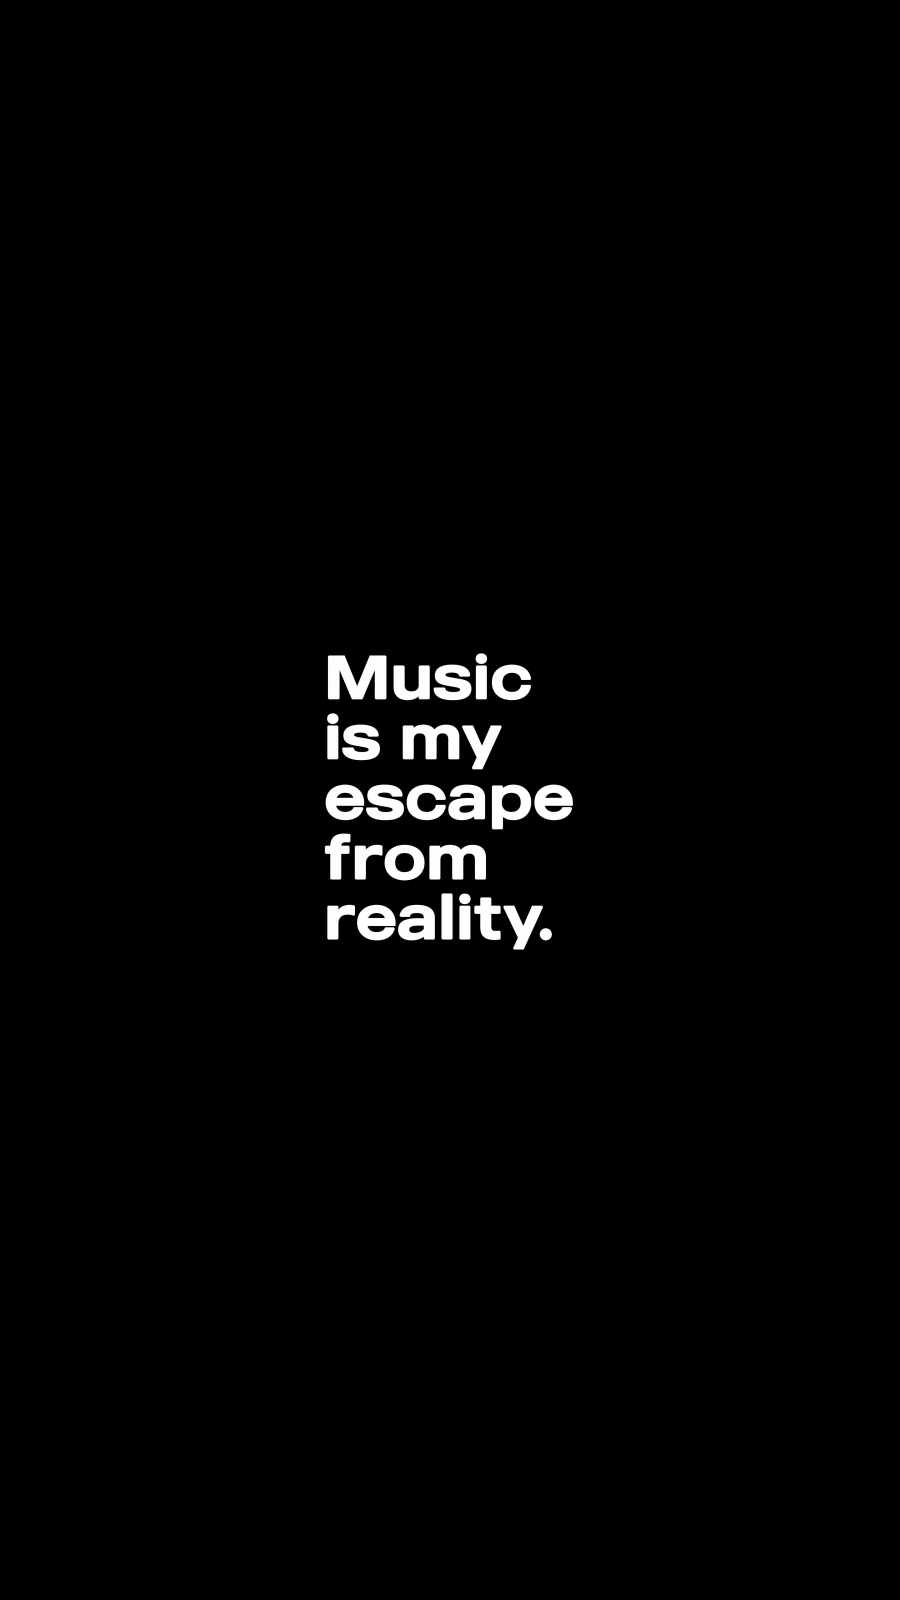 Music is Escape from Reality